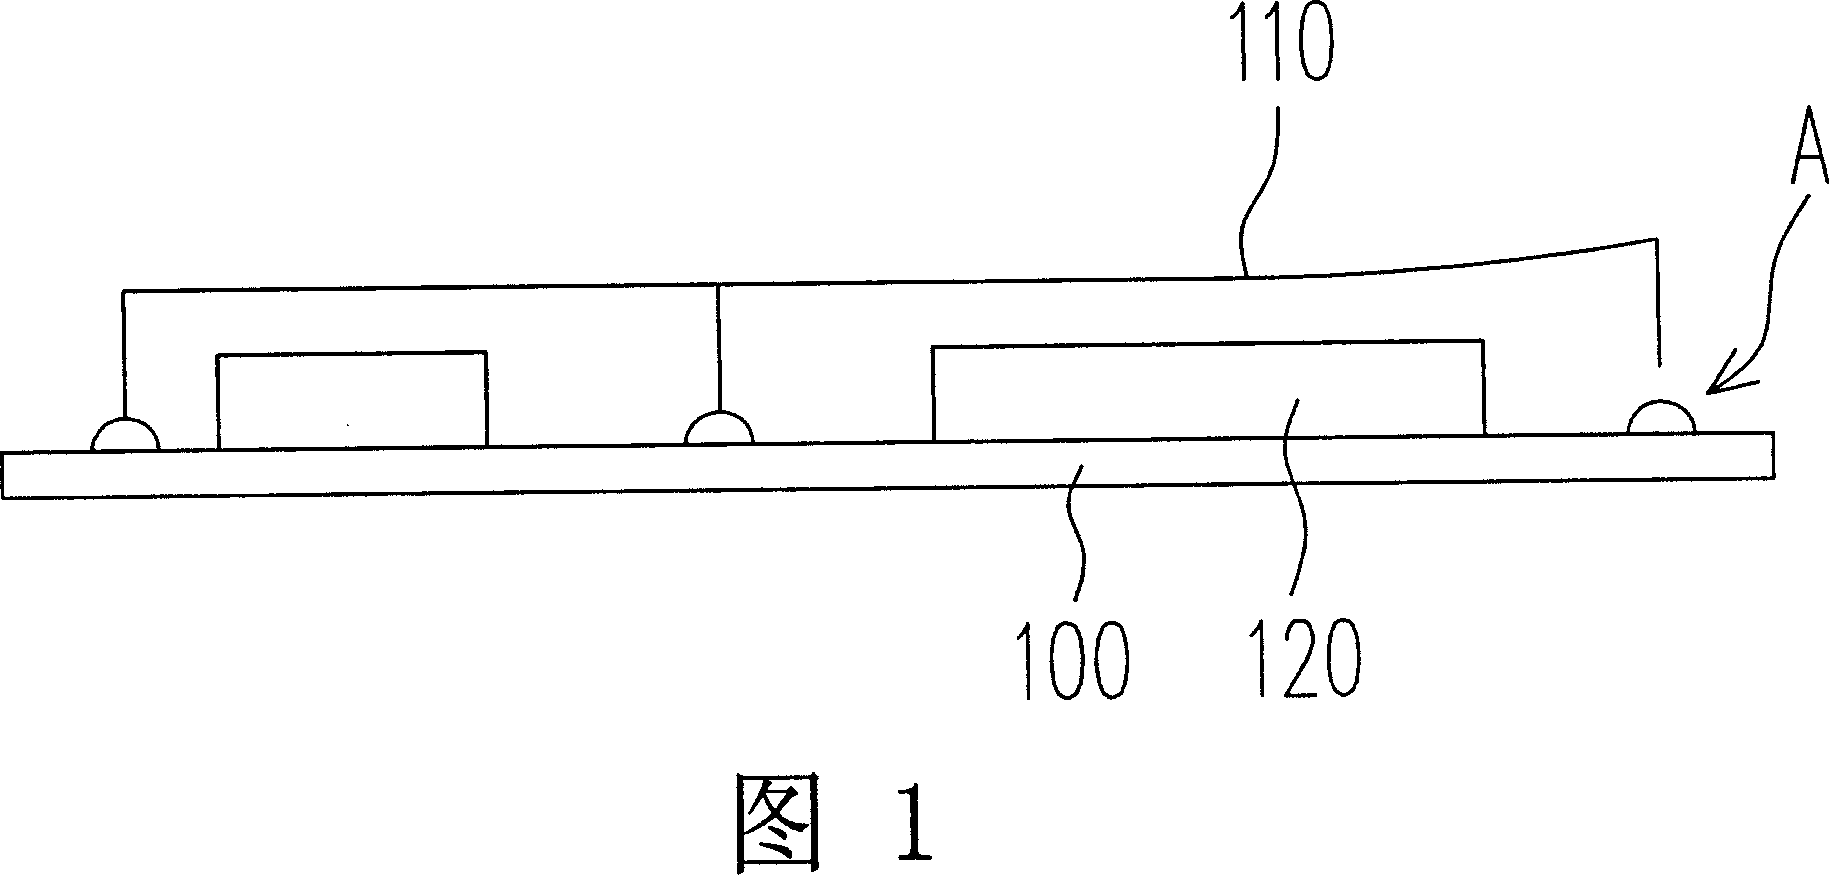 Detector with same flatness